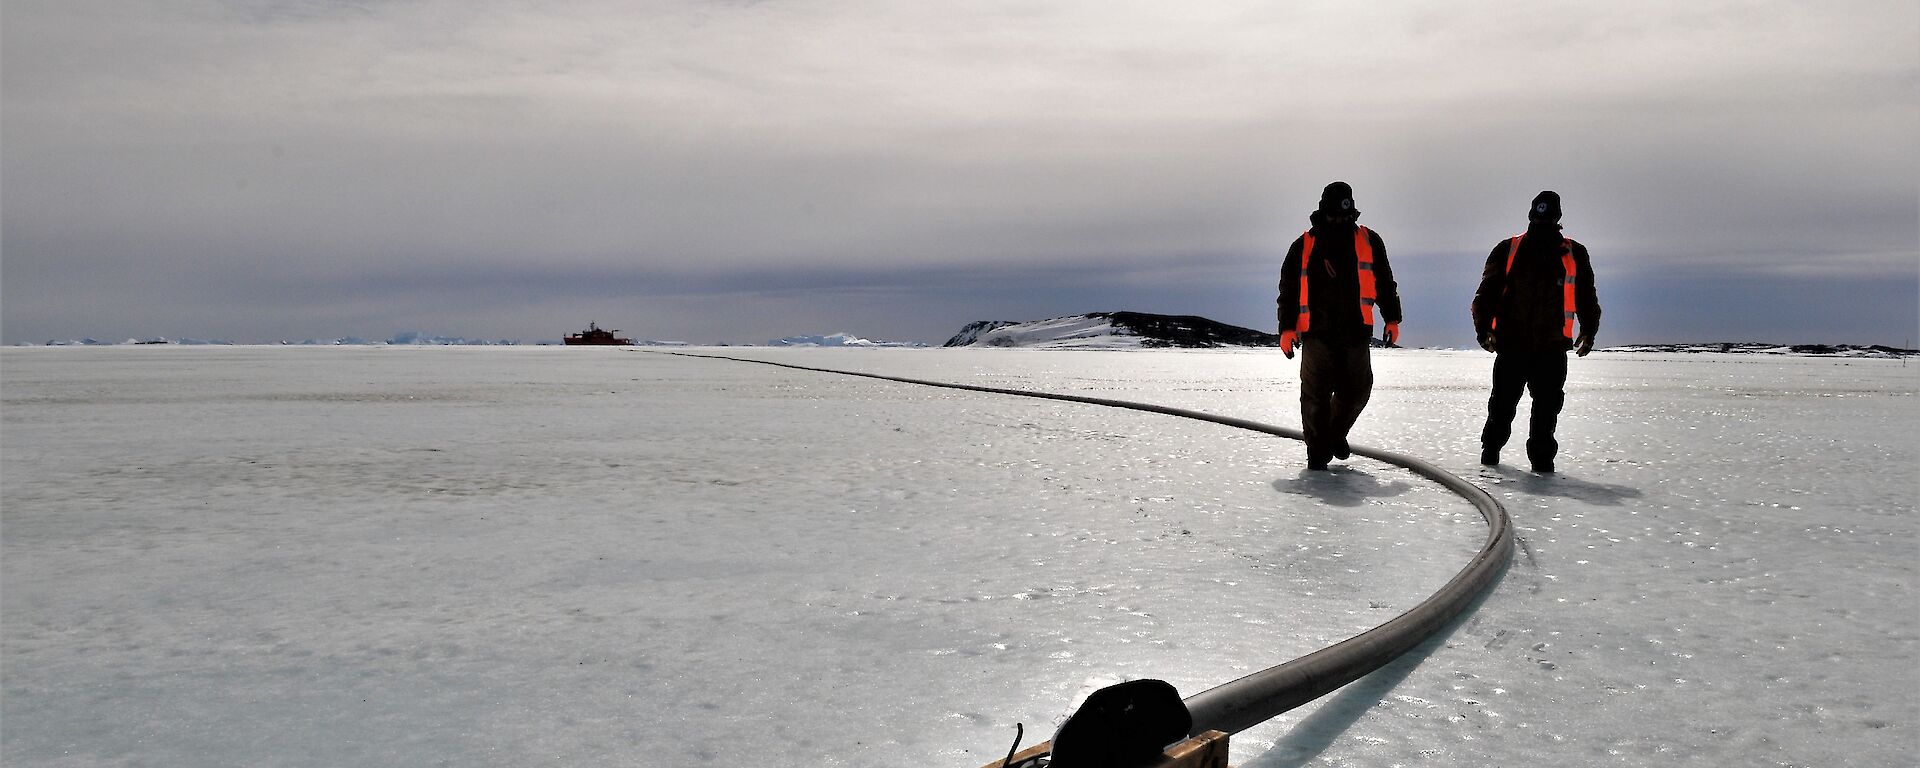 Two expeditioners walking along the fuel line with ship in background